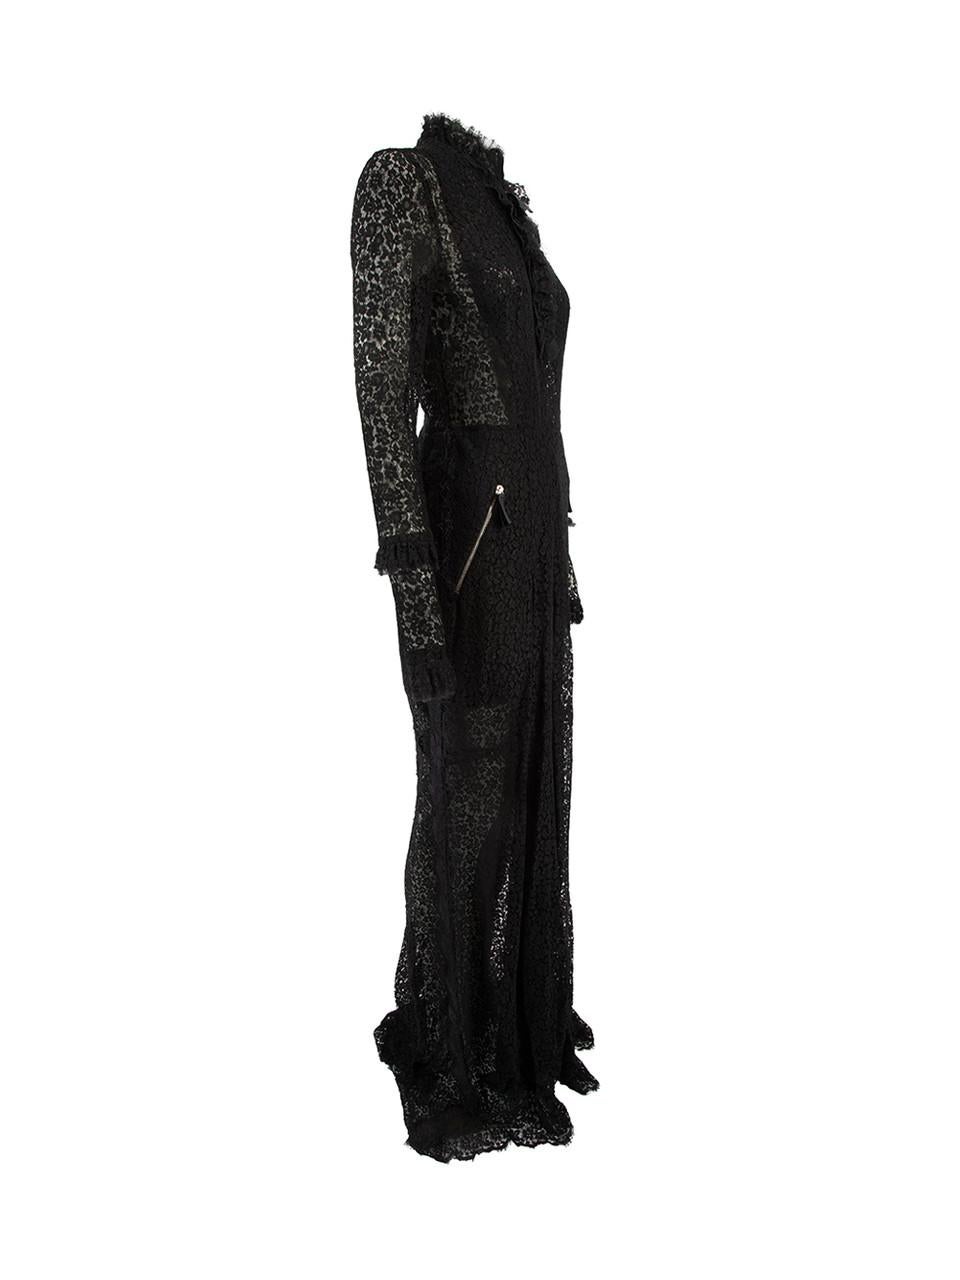 CONDITION is Very good. Hardly any visible wear to dress is evident on this used Alessandra Rich designer resale item.   Details  Black Lace Maxi dress Floral lace pattern Zipped cuffs Front 1/3 zip closure Back zip closure with hook and eye Front